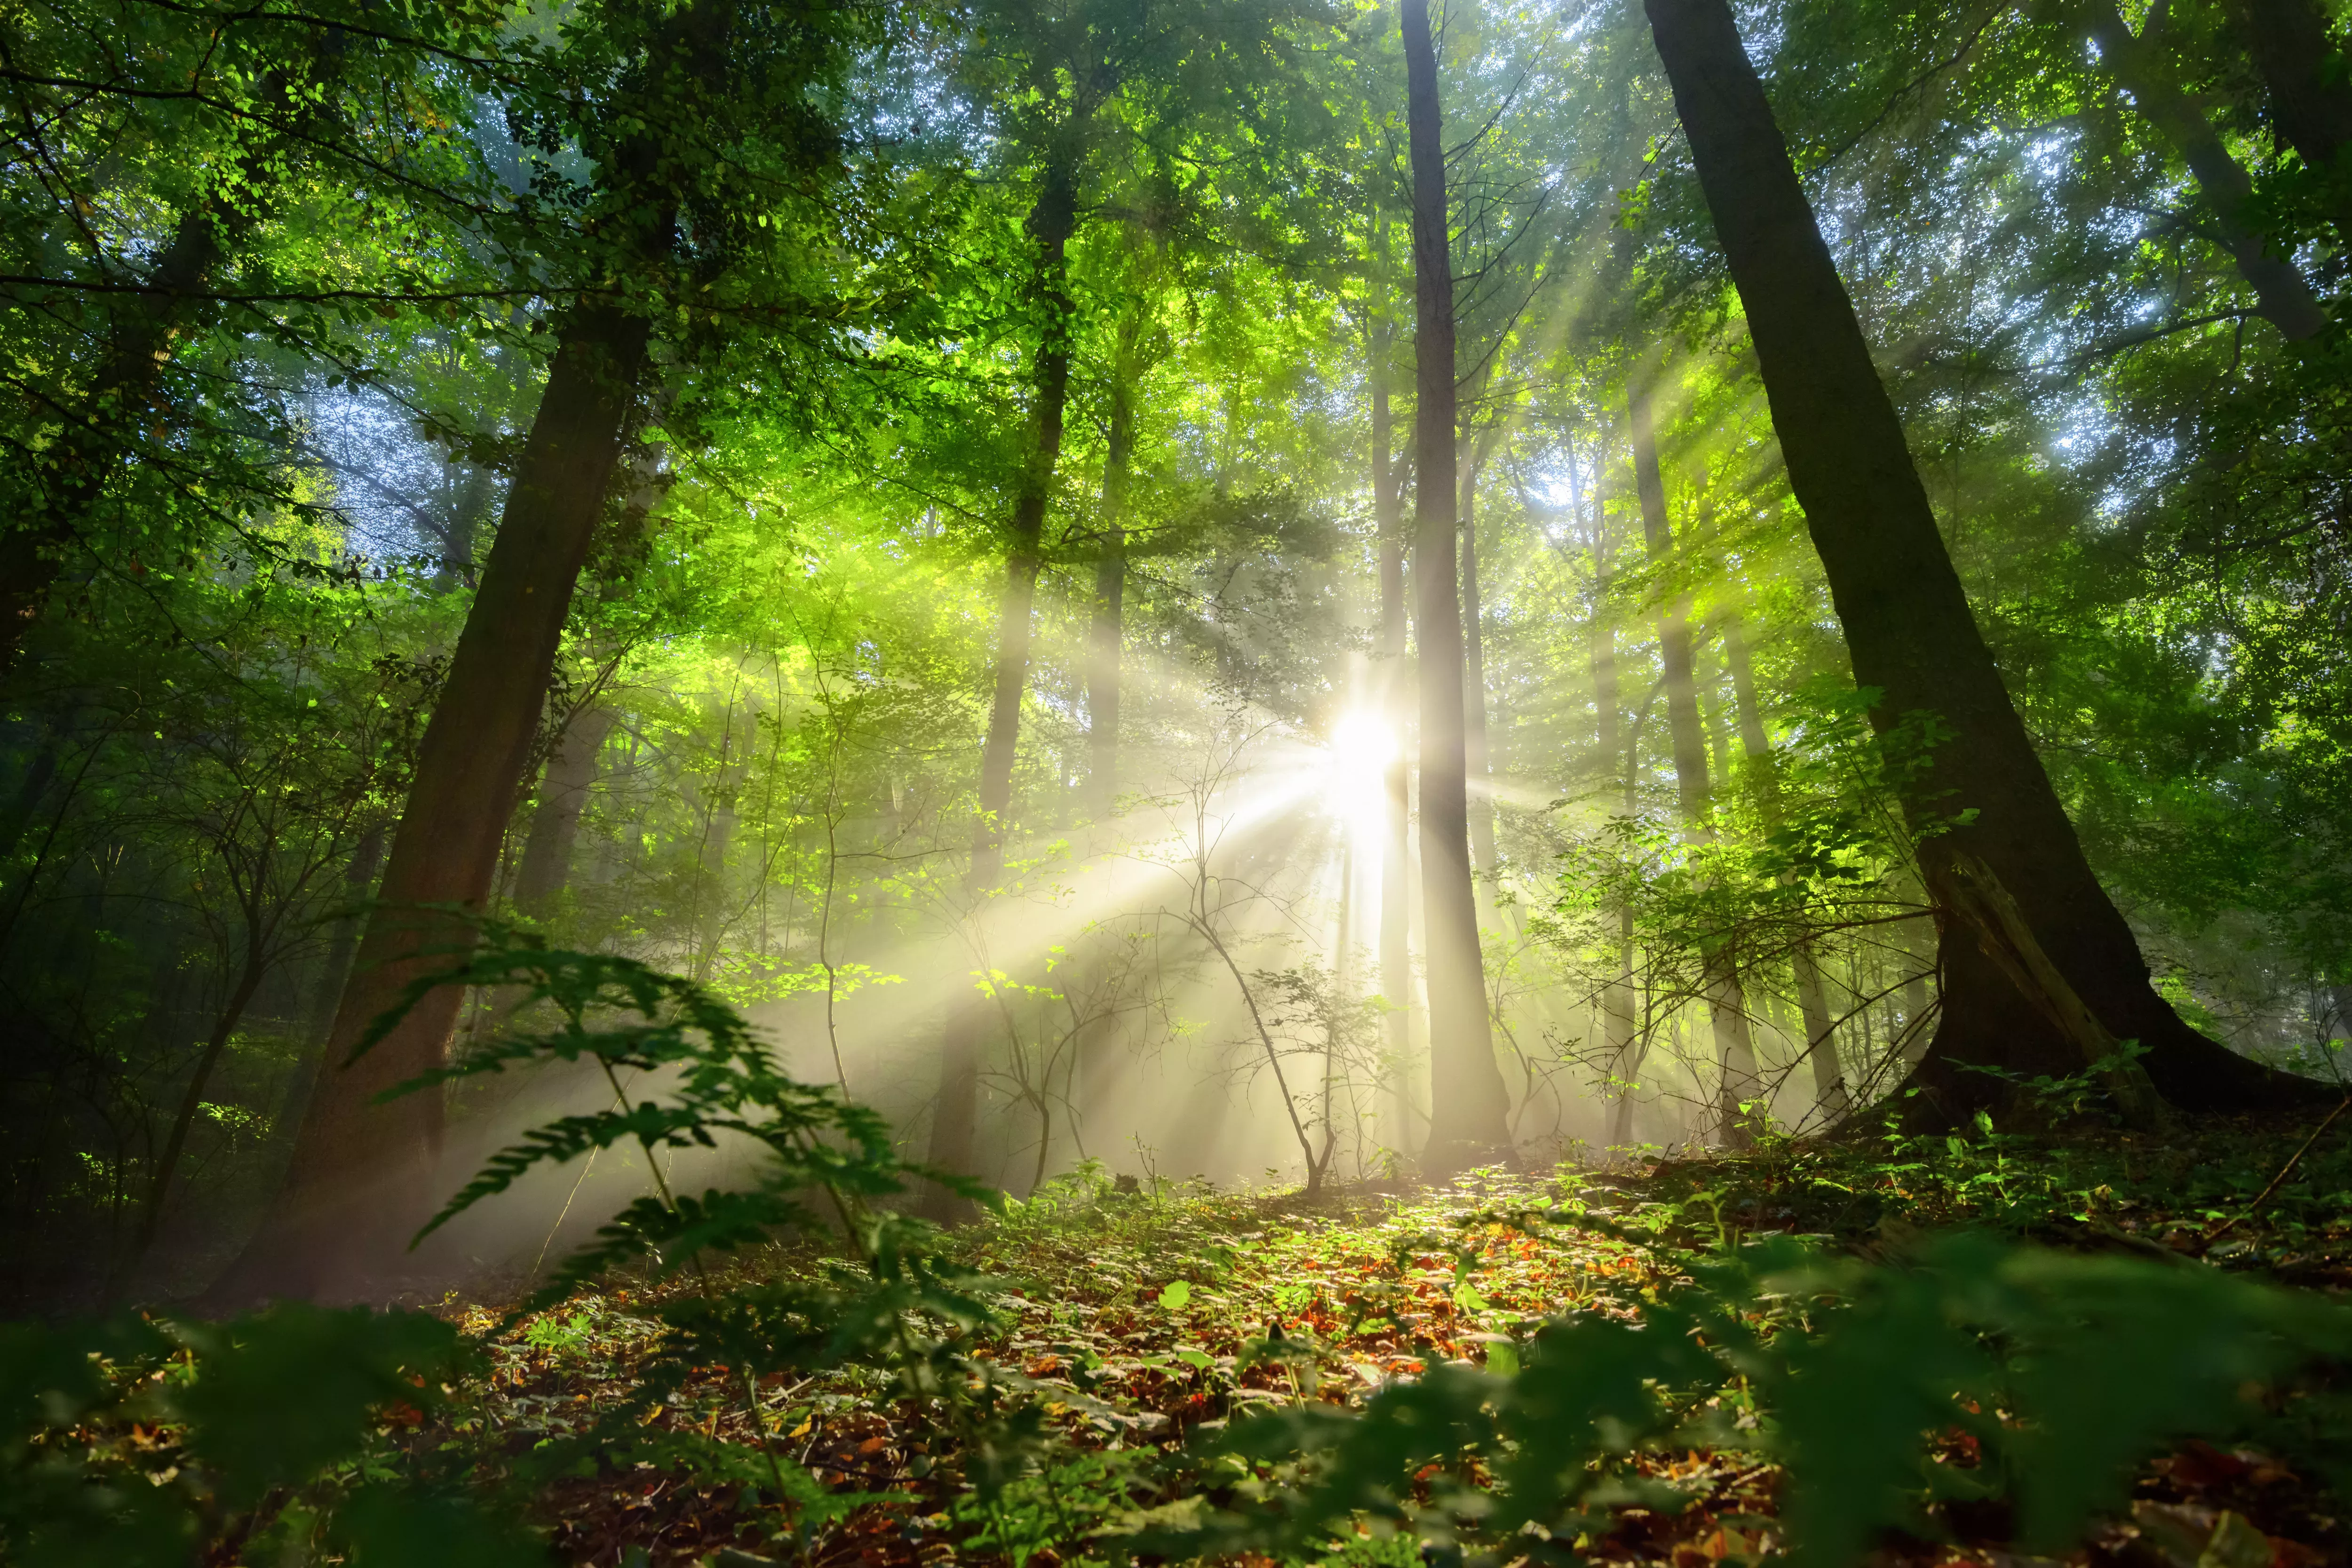 A forest landscape has light shining through gaps in the canopy. Leaf litter covers the floor.